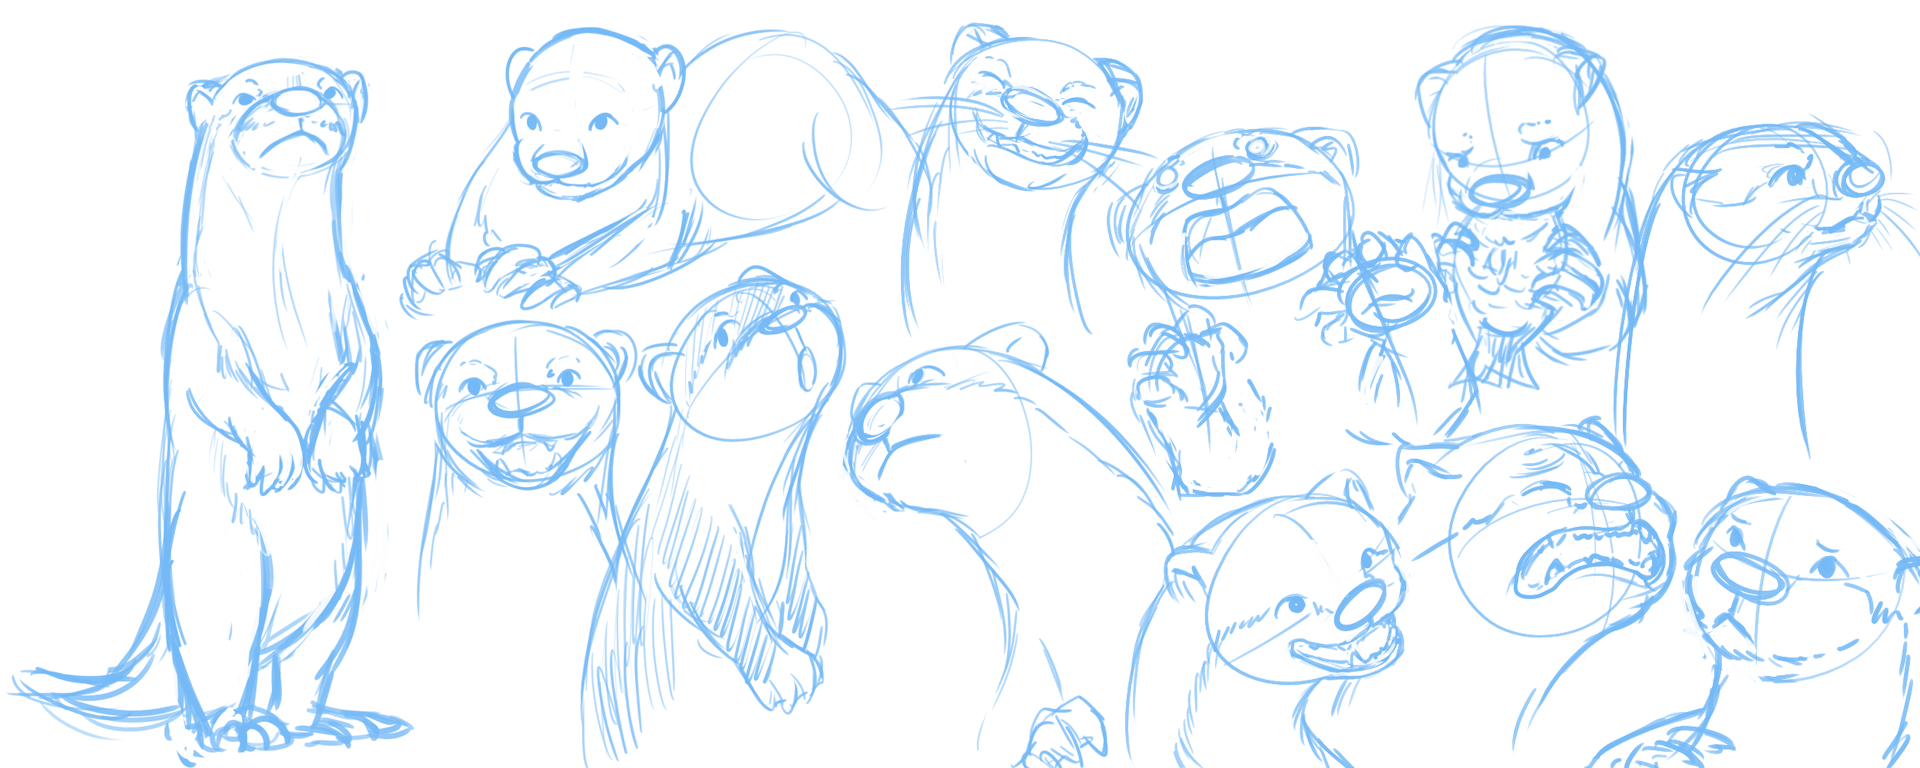 Ideation sketches for Mr. Otter's character, showing an otter in different poses and expressions, with a style ranging from fairly realistic to more comic.